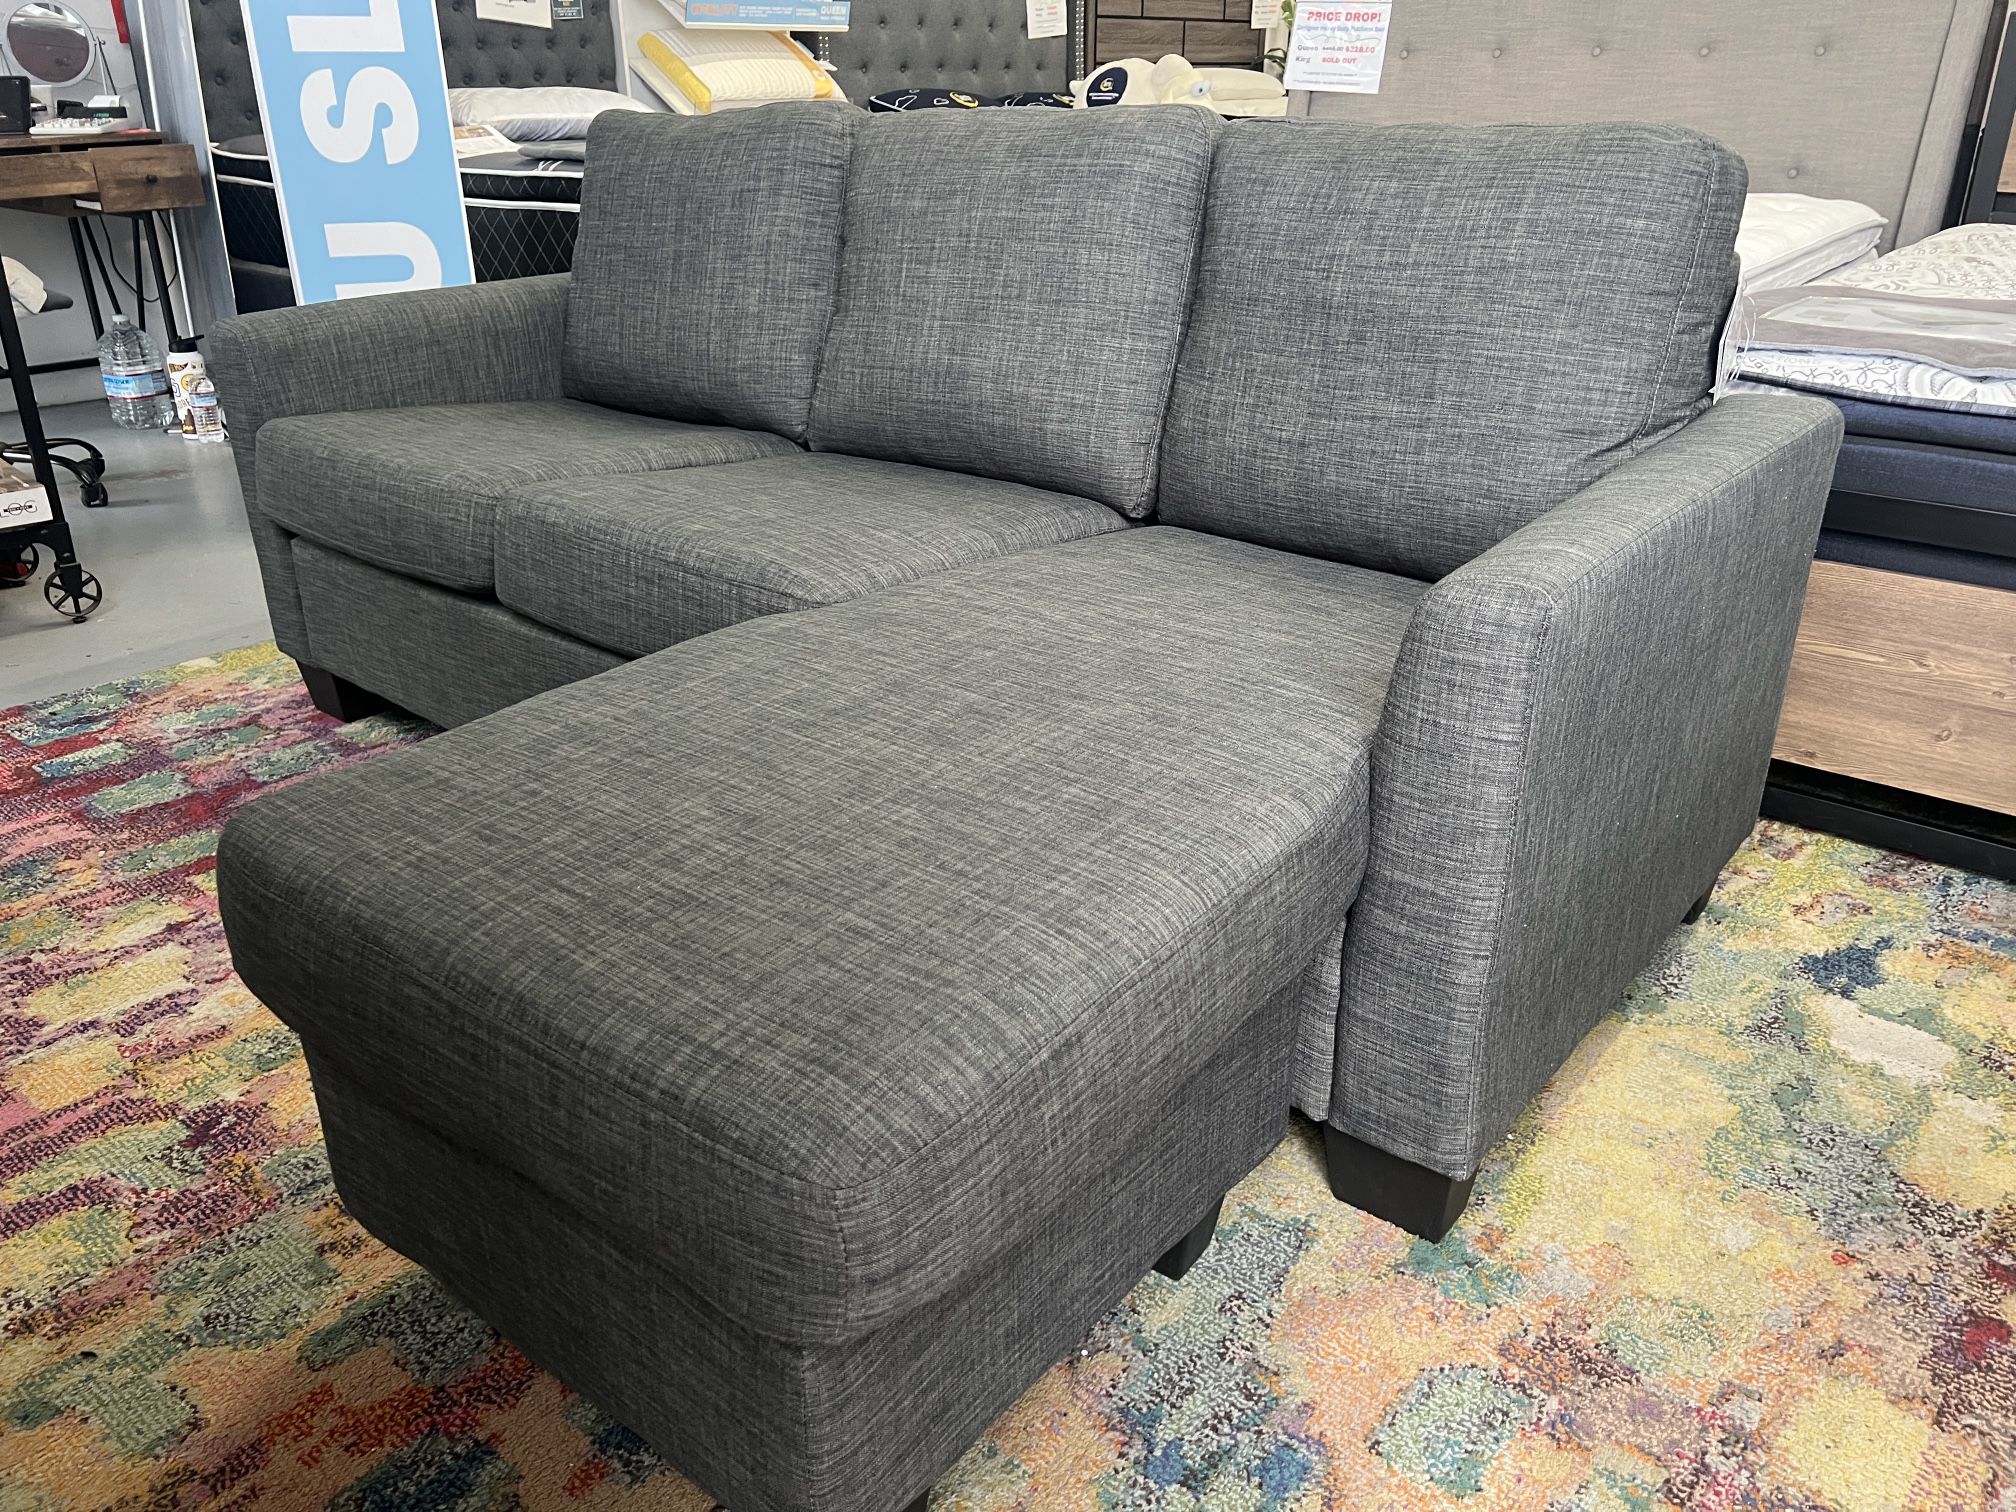 BRAND NEW! Space Saver Sectional With Reversible Chaise Great price 